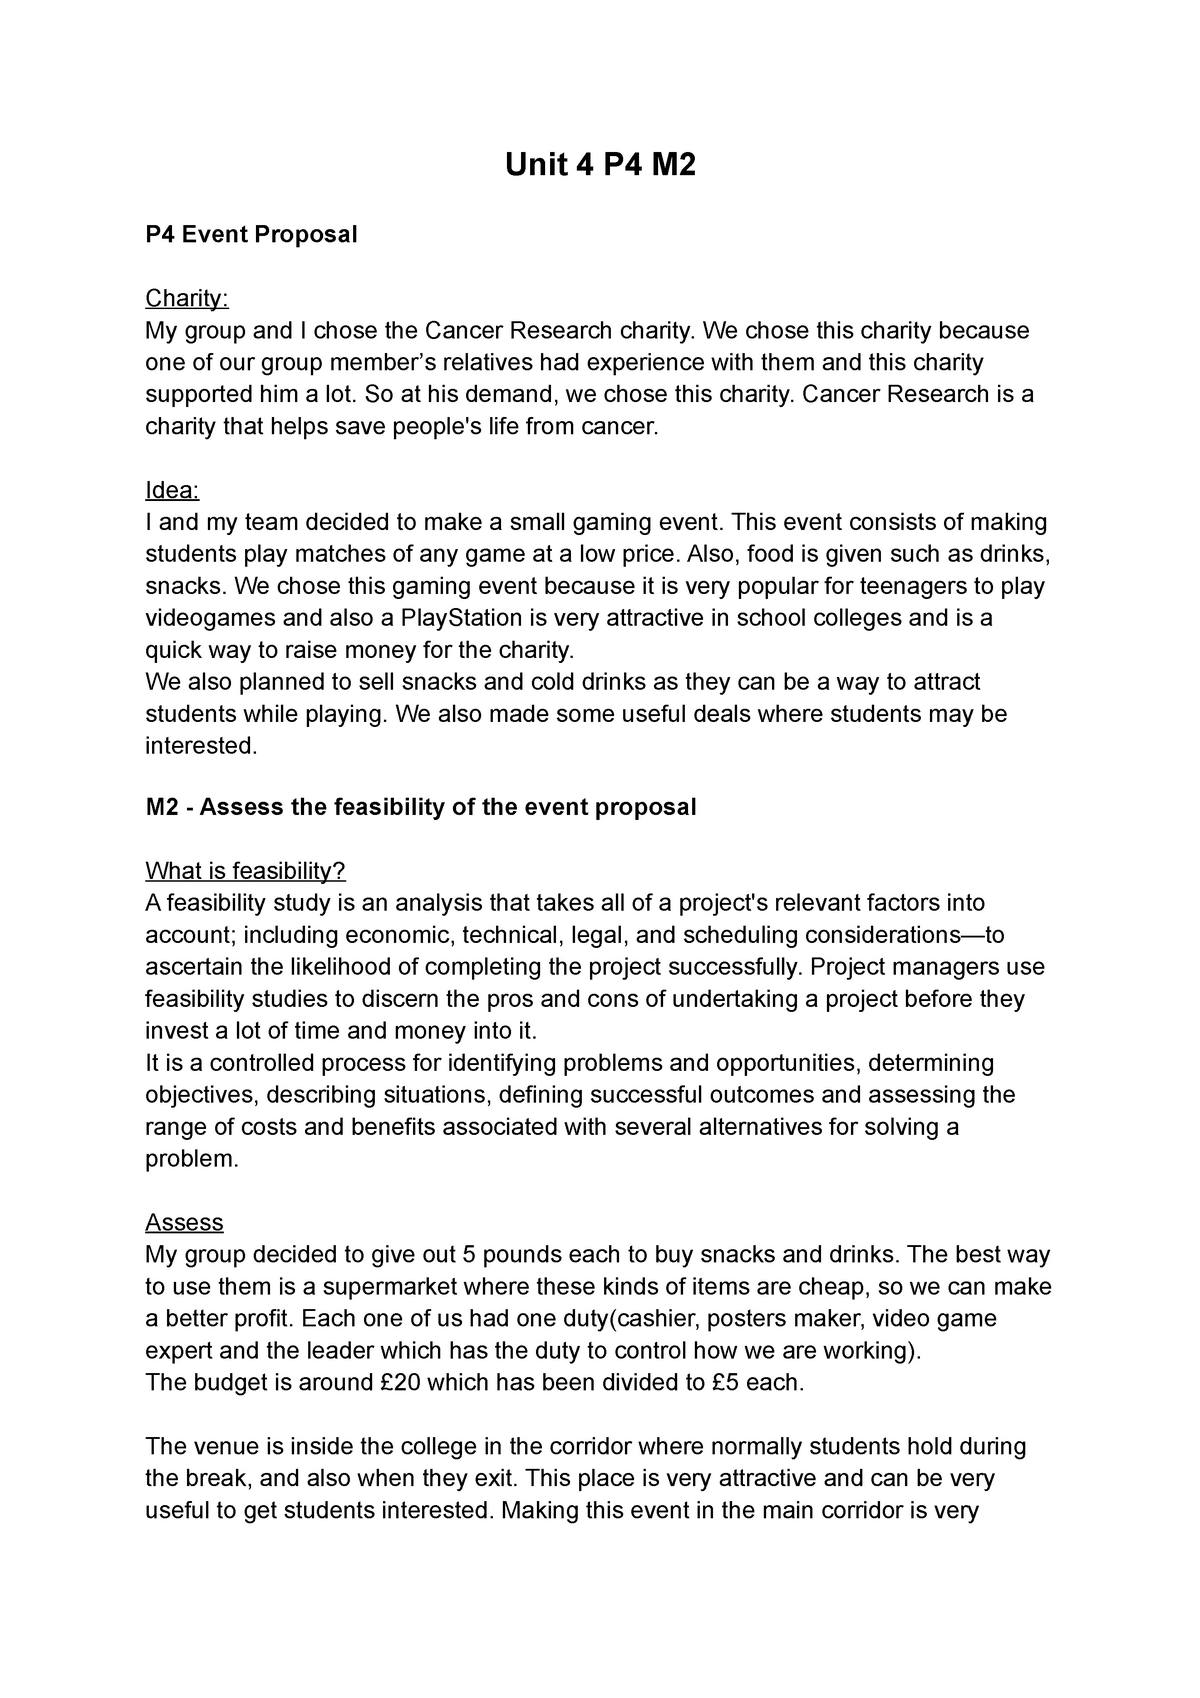 btec level 3 applied science unit 4 assignment briefs